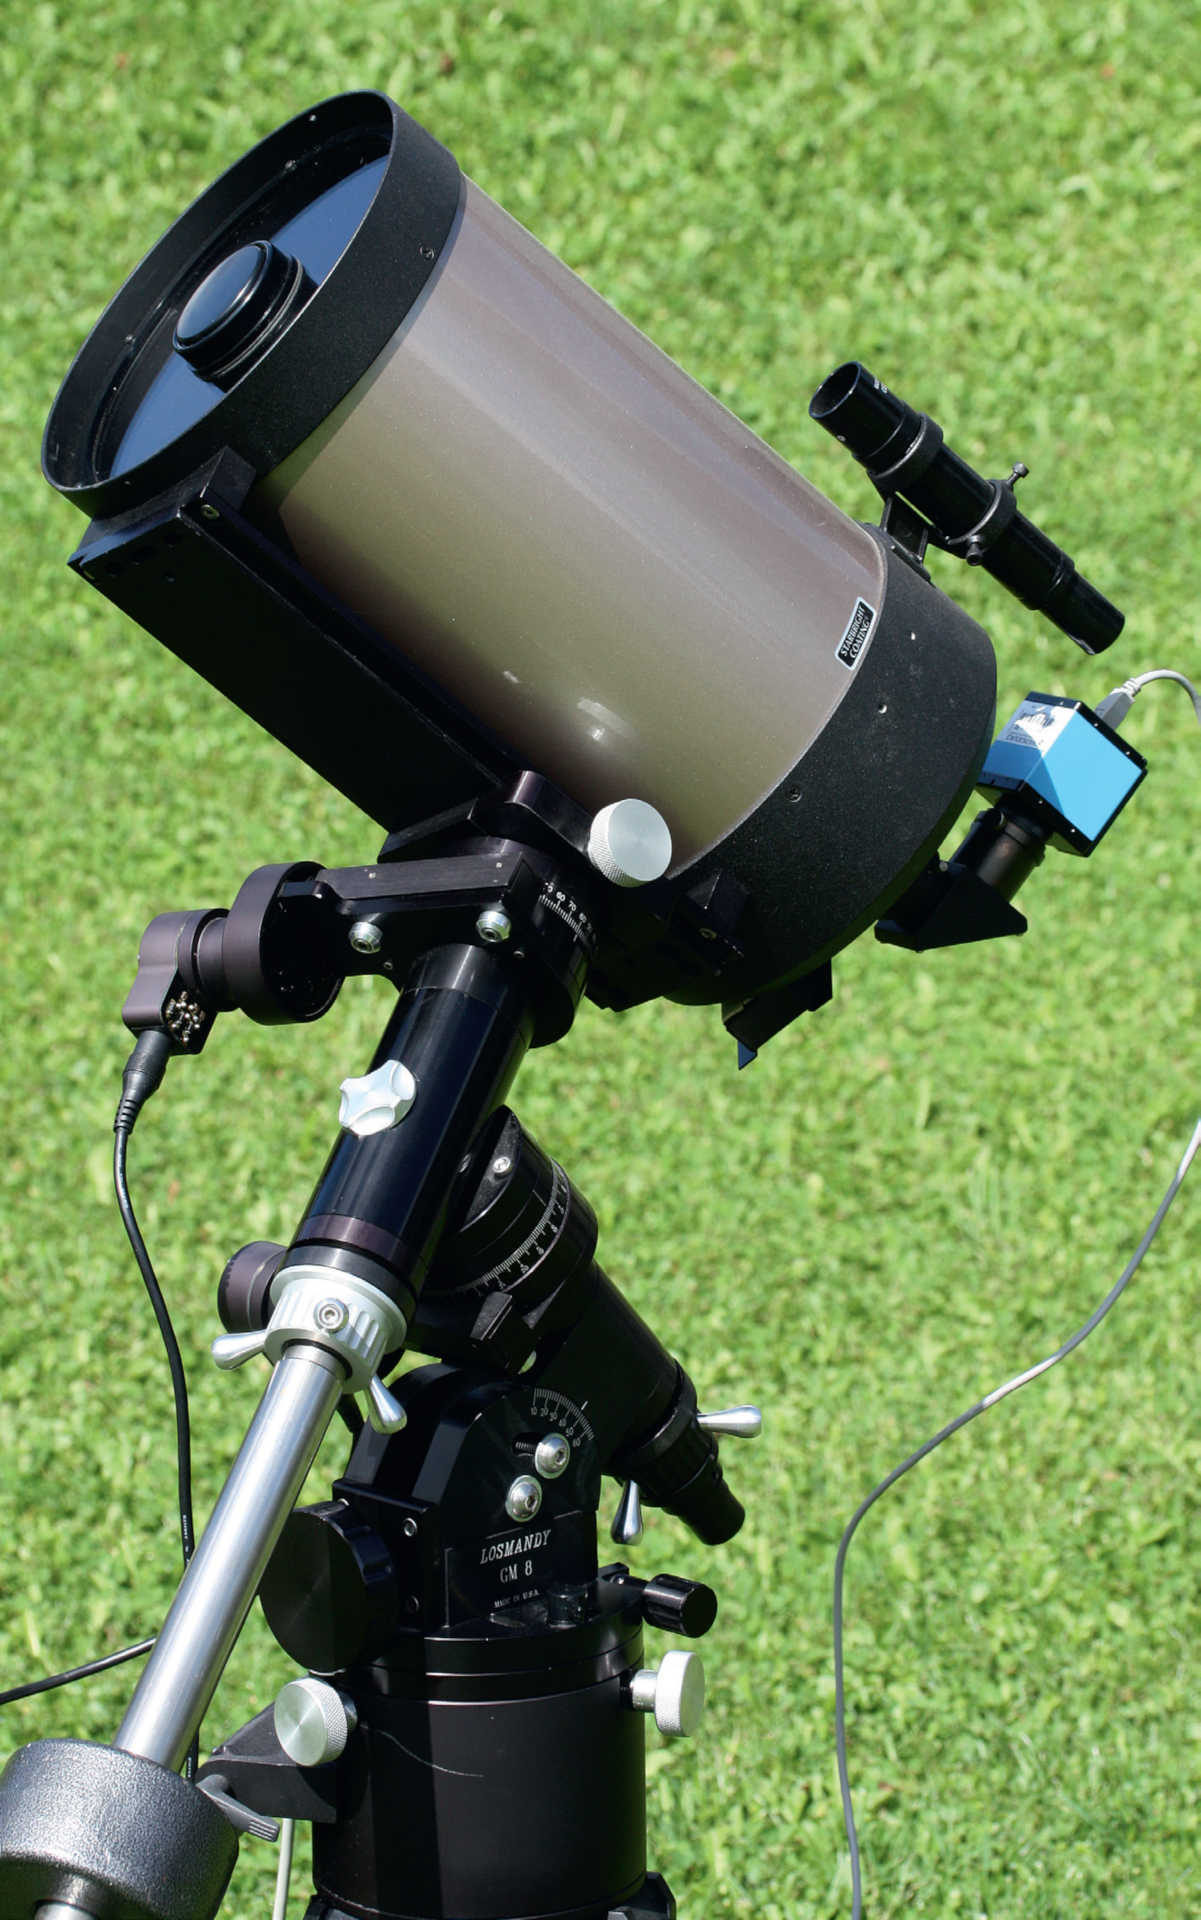 As an introduction to lunar photography, a Schmidt Cassegrain telescope on a motor-guided mount is often used (here a Celestron C8 SCT on a Losmandy GM8 mount). The imaging device is an uncooled CCD camera from The Imaging Source. U. Dittler